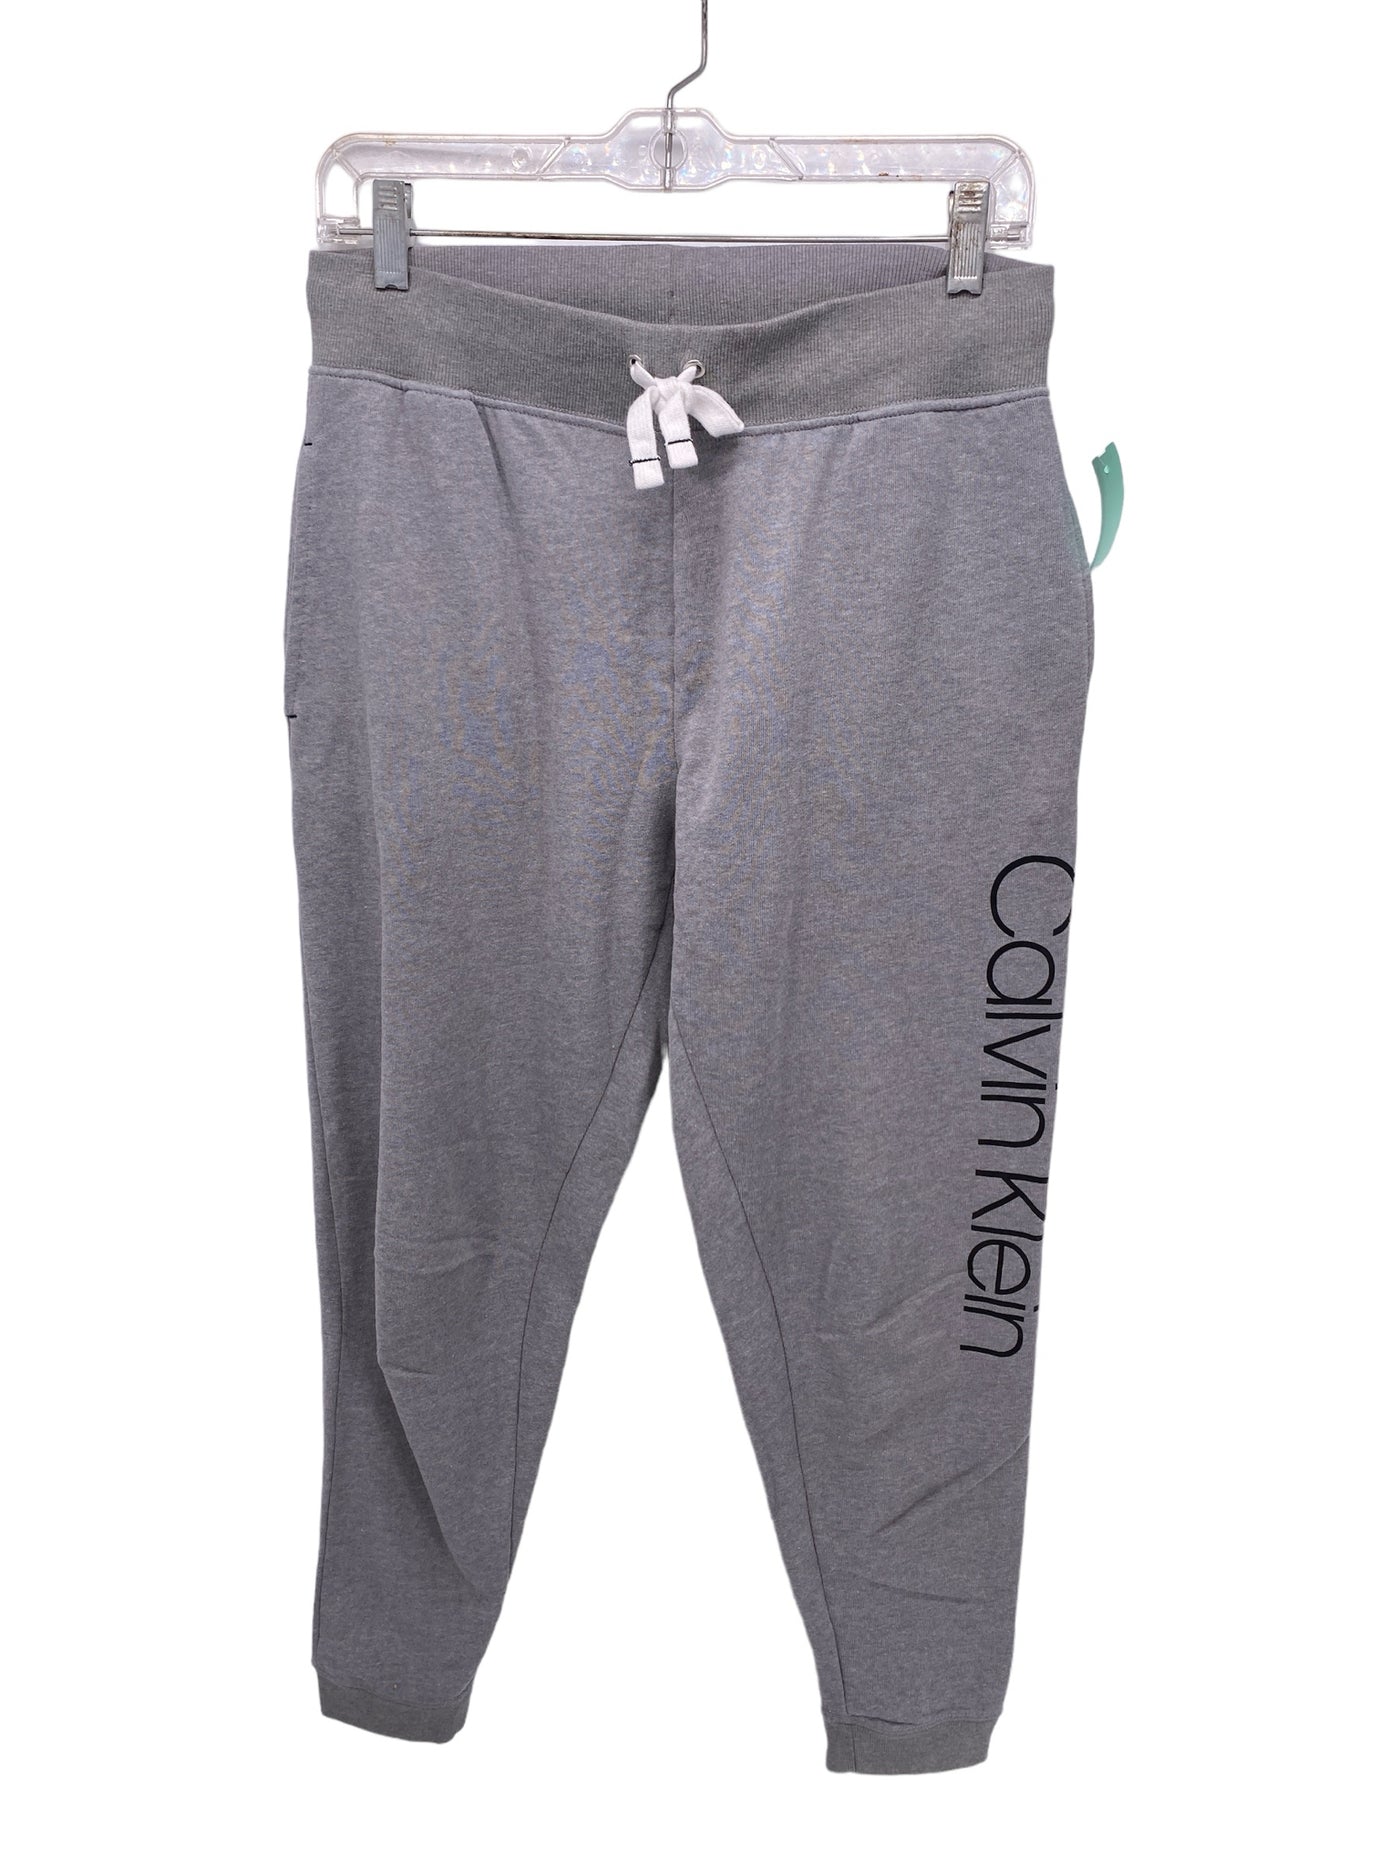 Calvin Klein Misses Size Small Grey Athleisure Pants